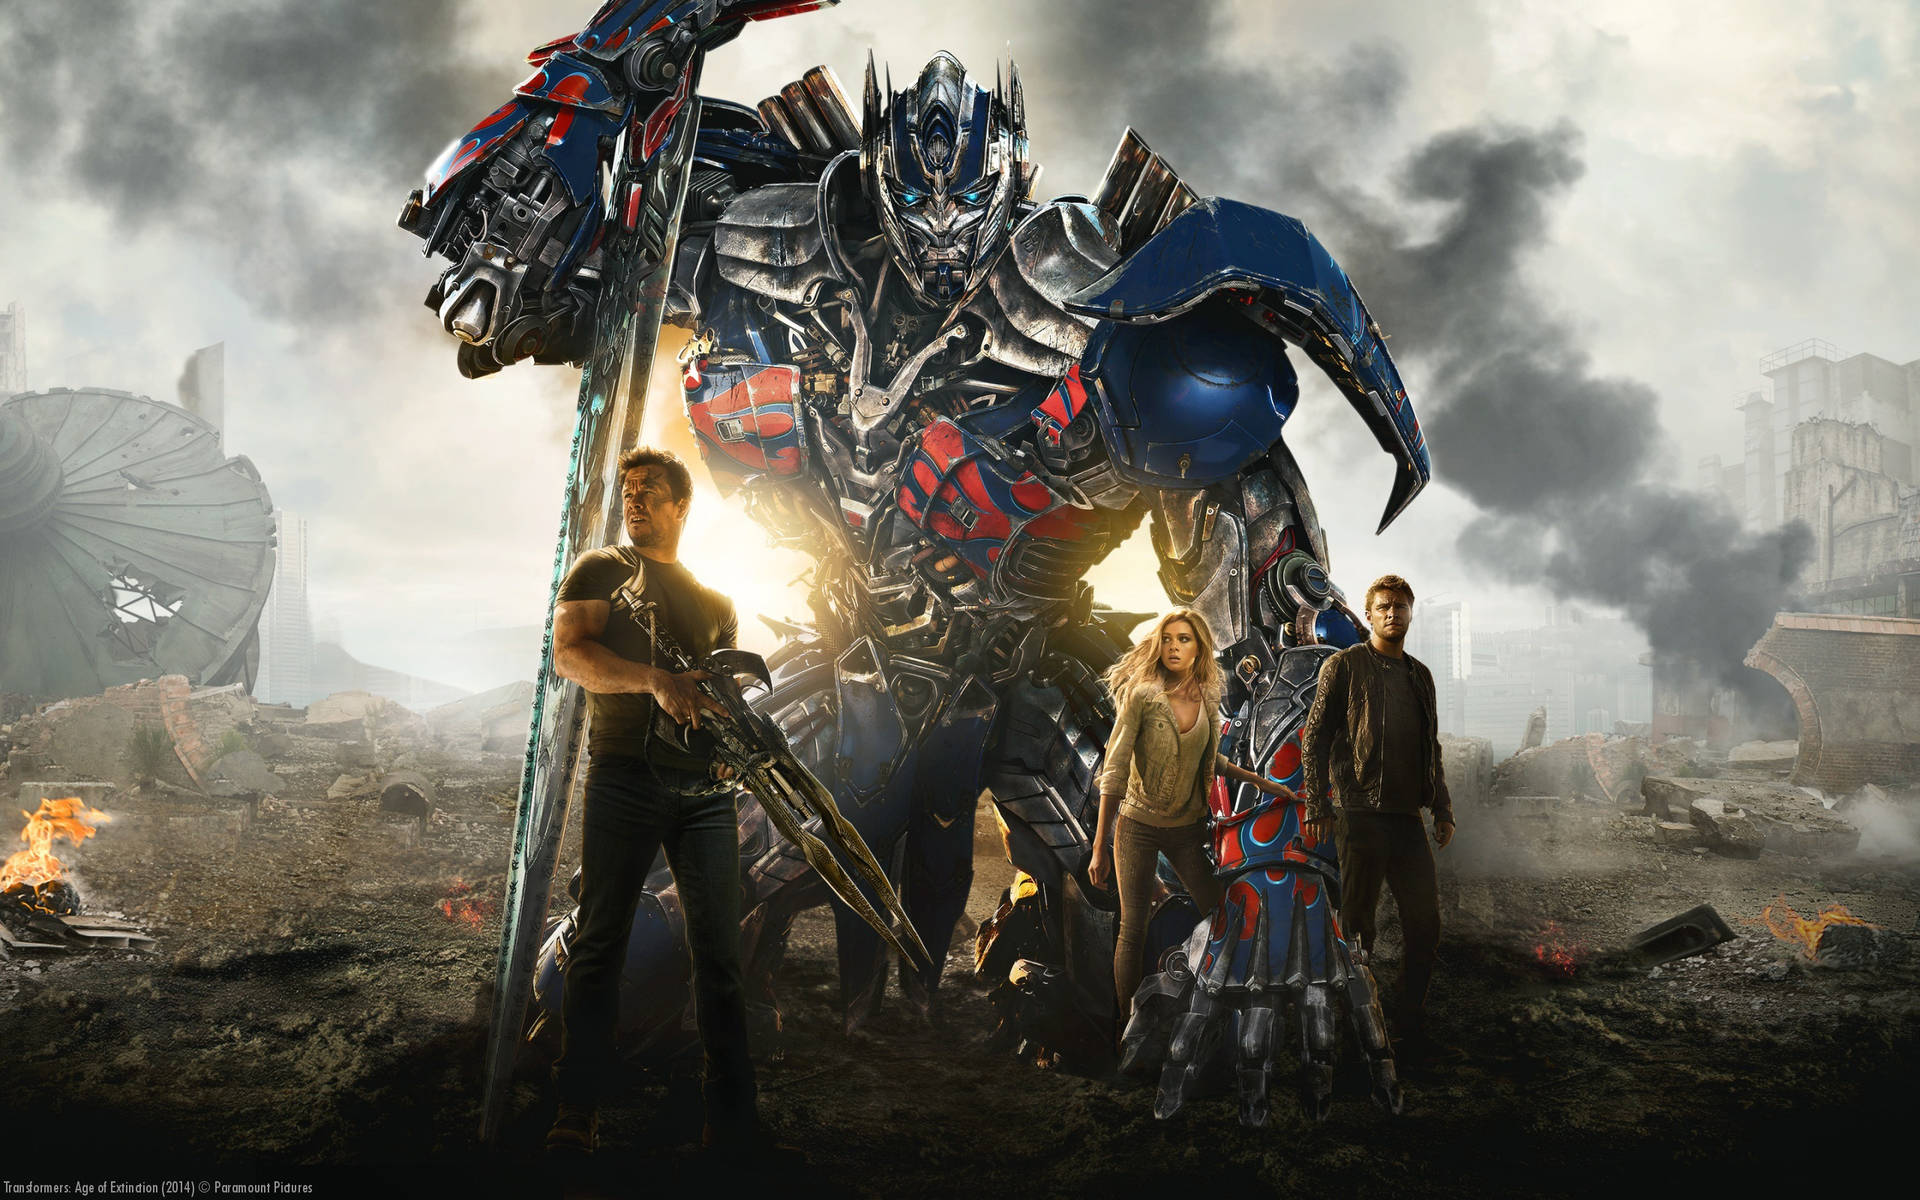 Transformers 4 Film Poster Background